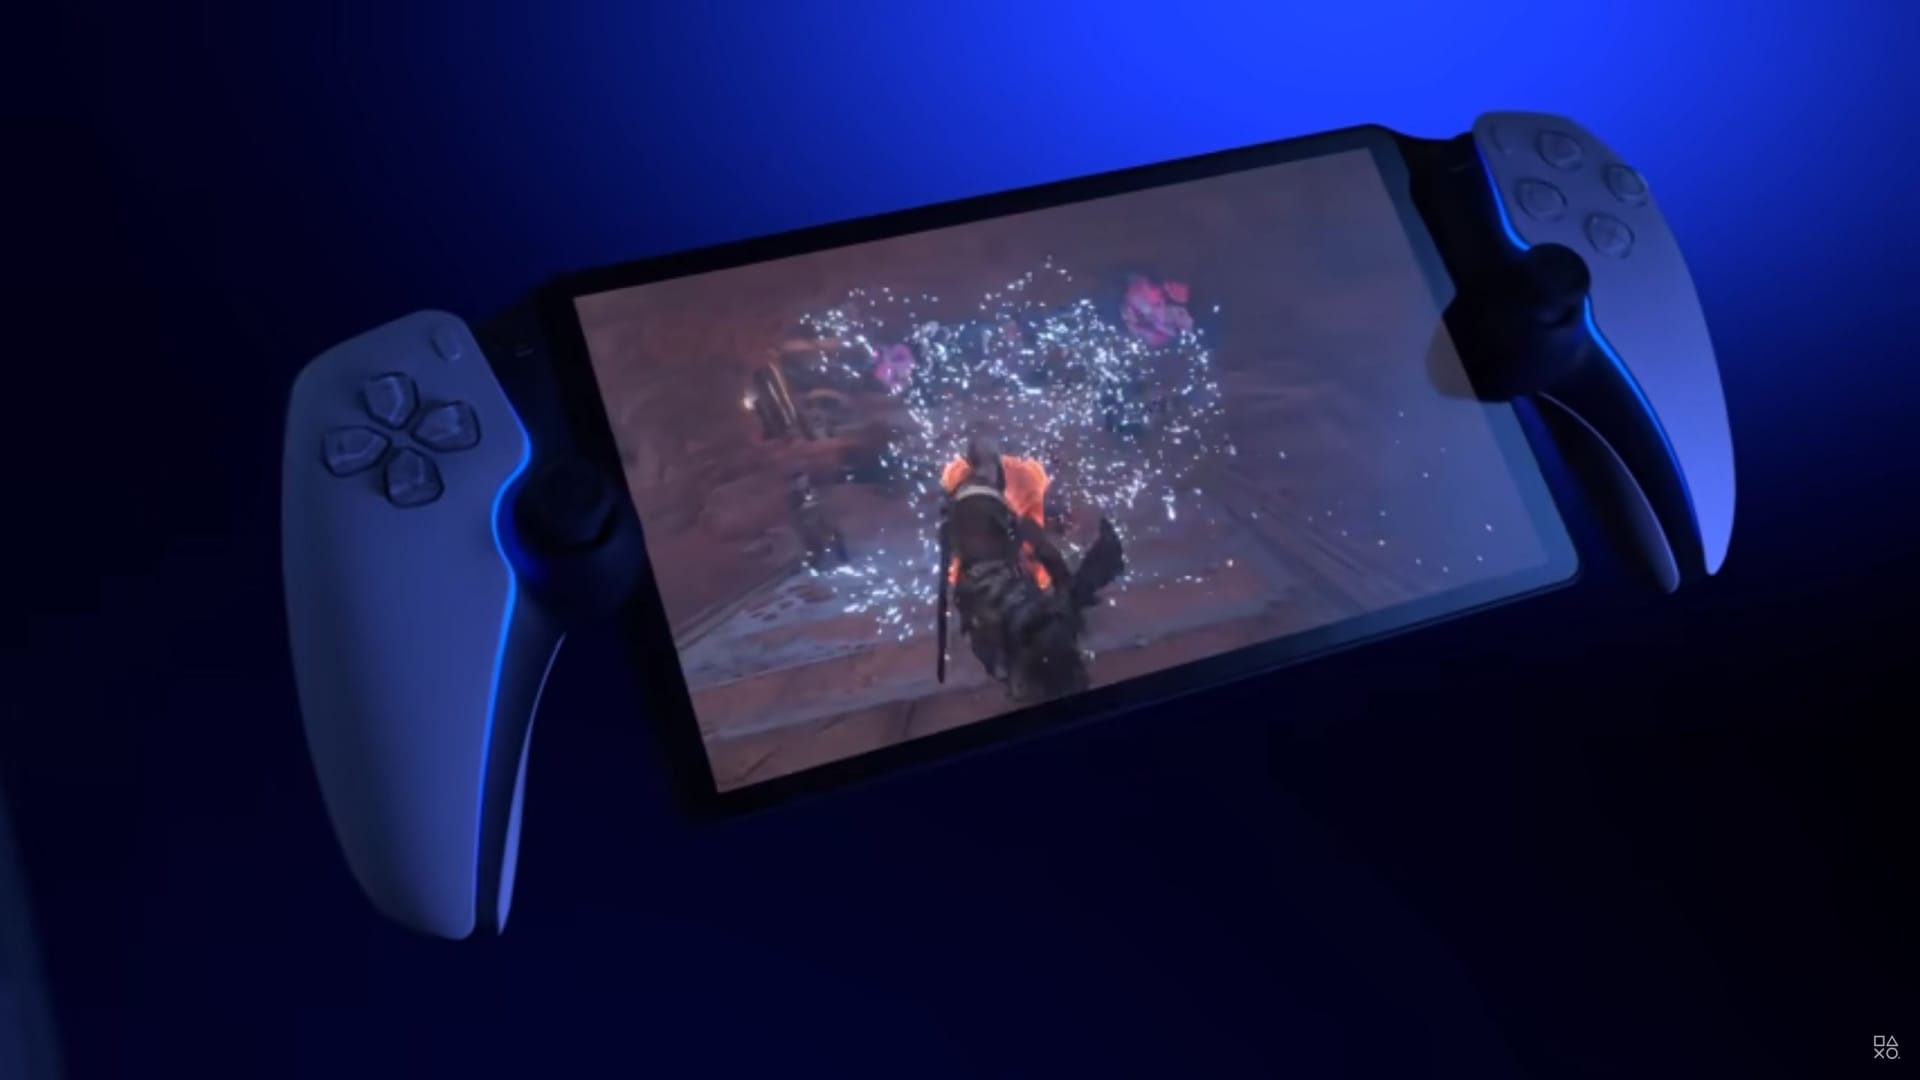 Project Q, a new portable device from Sony 